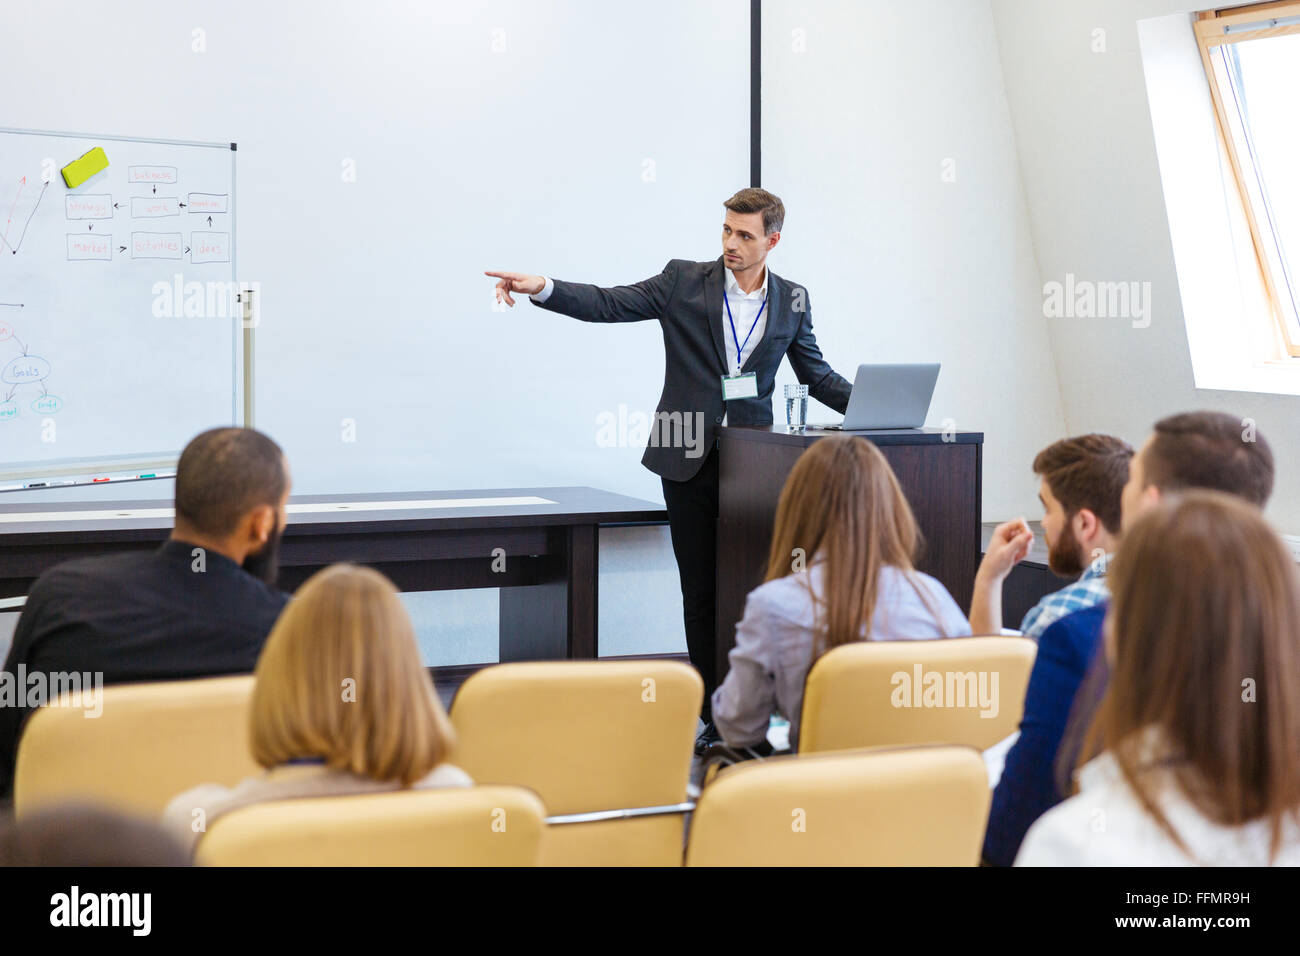 Speaker giving presentation at business conference in meeting hall Stock Photo